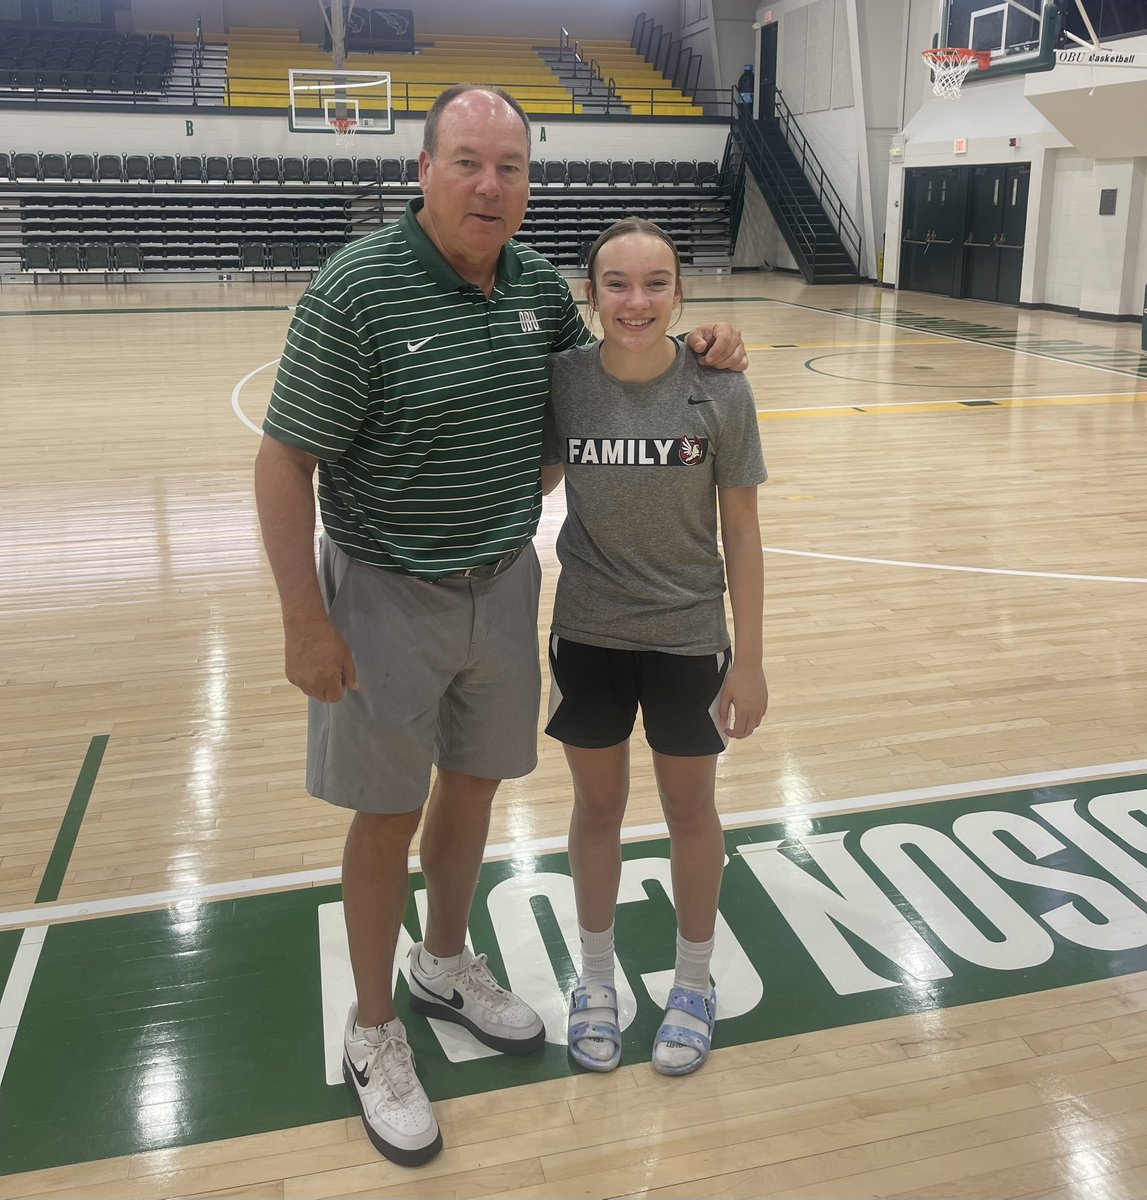 Great camp yesterday @OBU_WBBall! Thanks to @BoOverton and @bseagler!